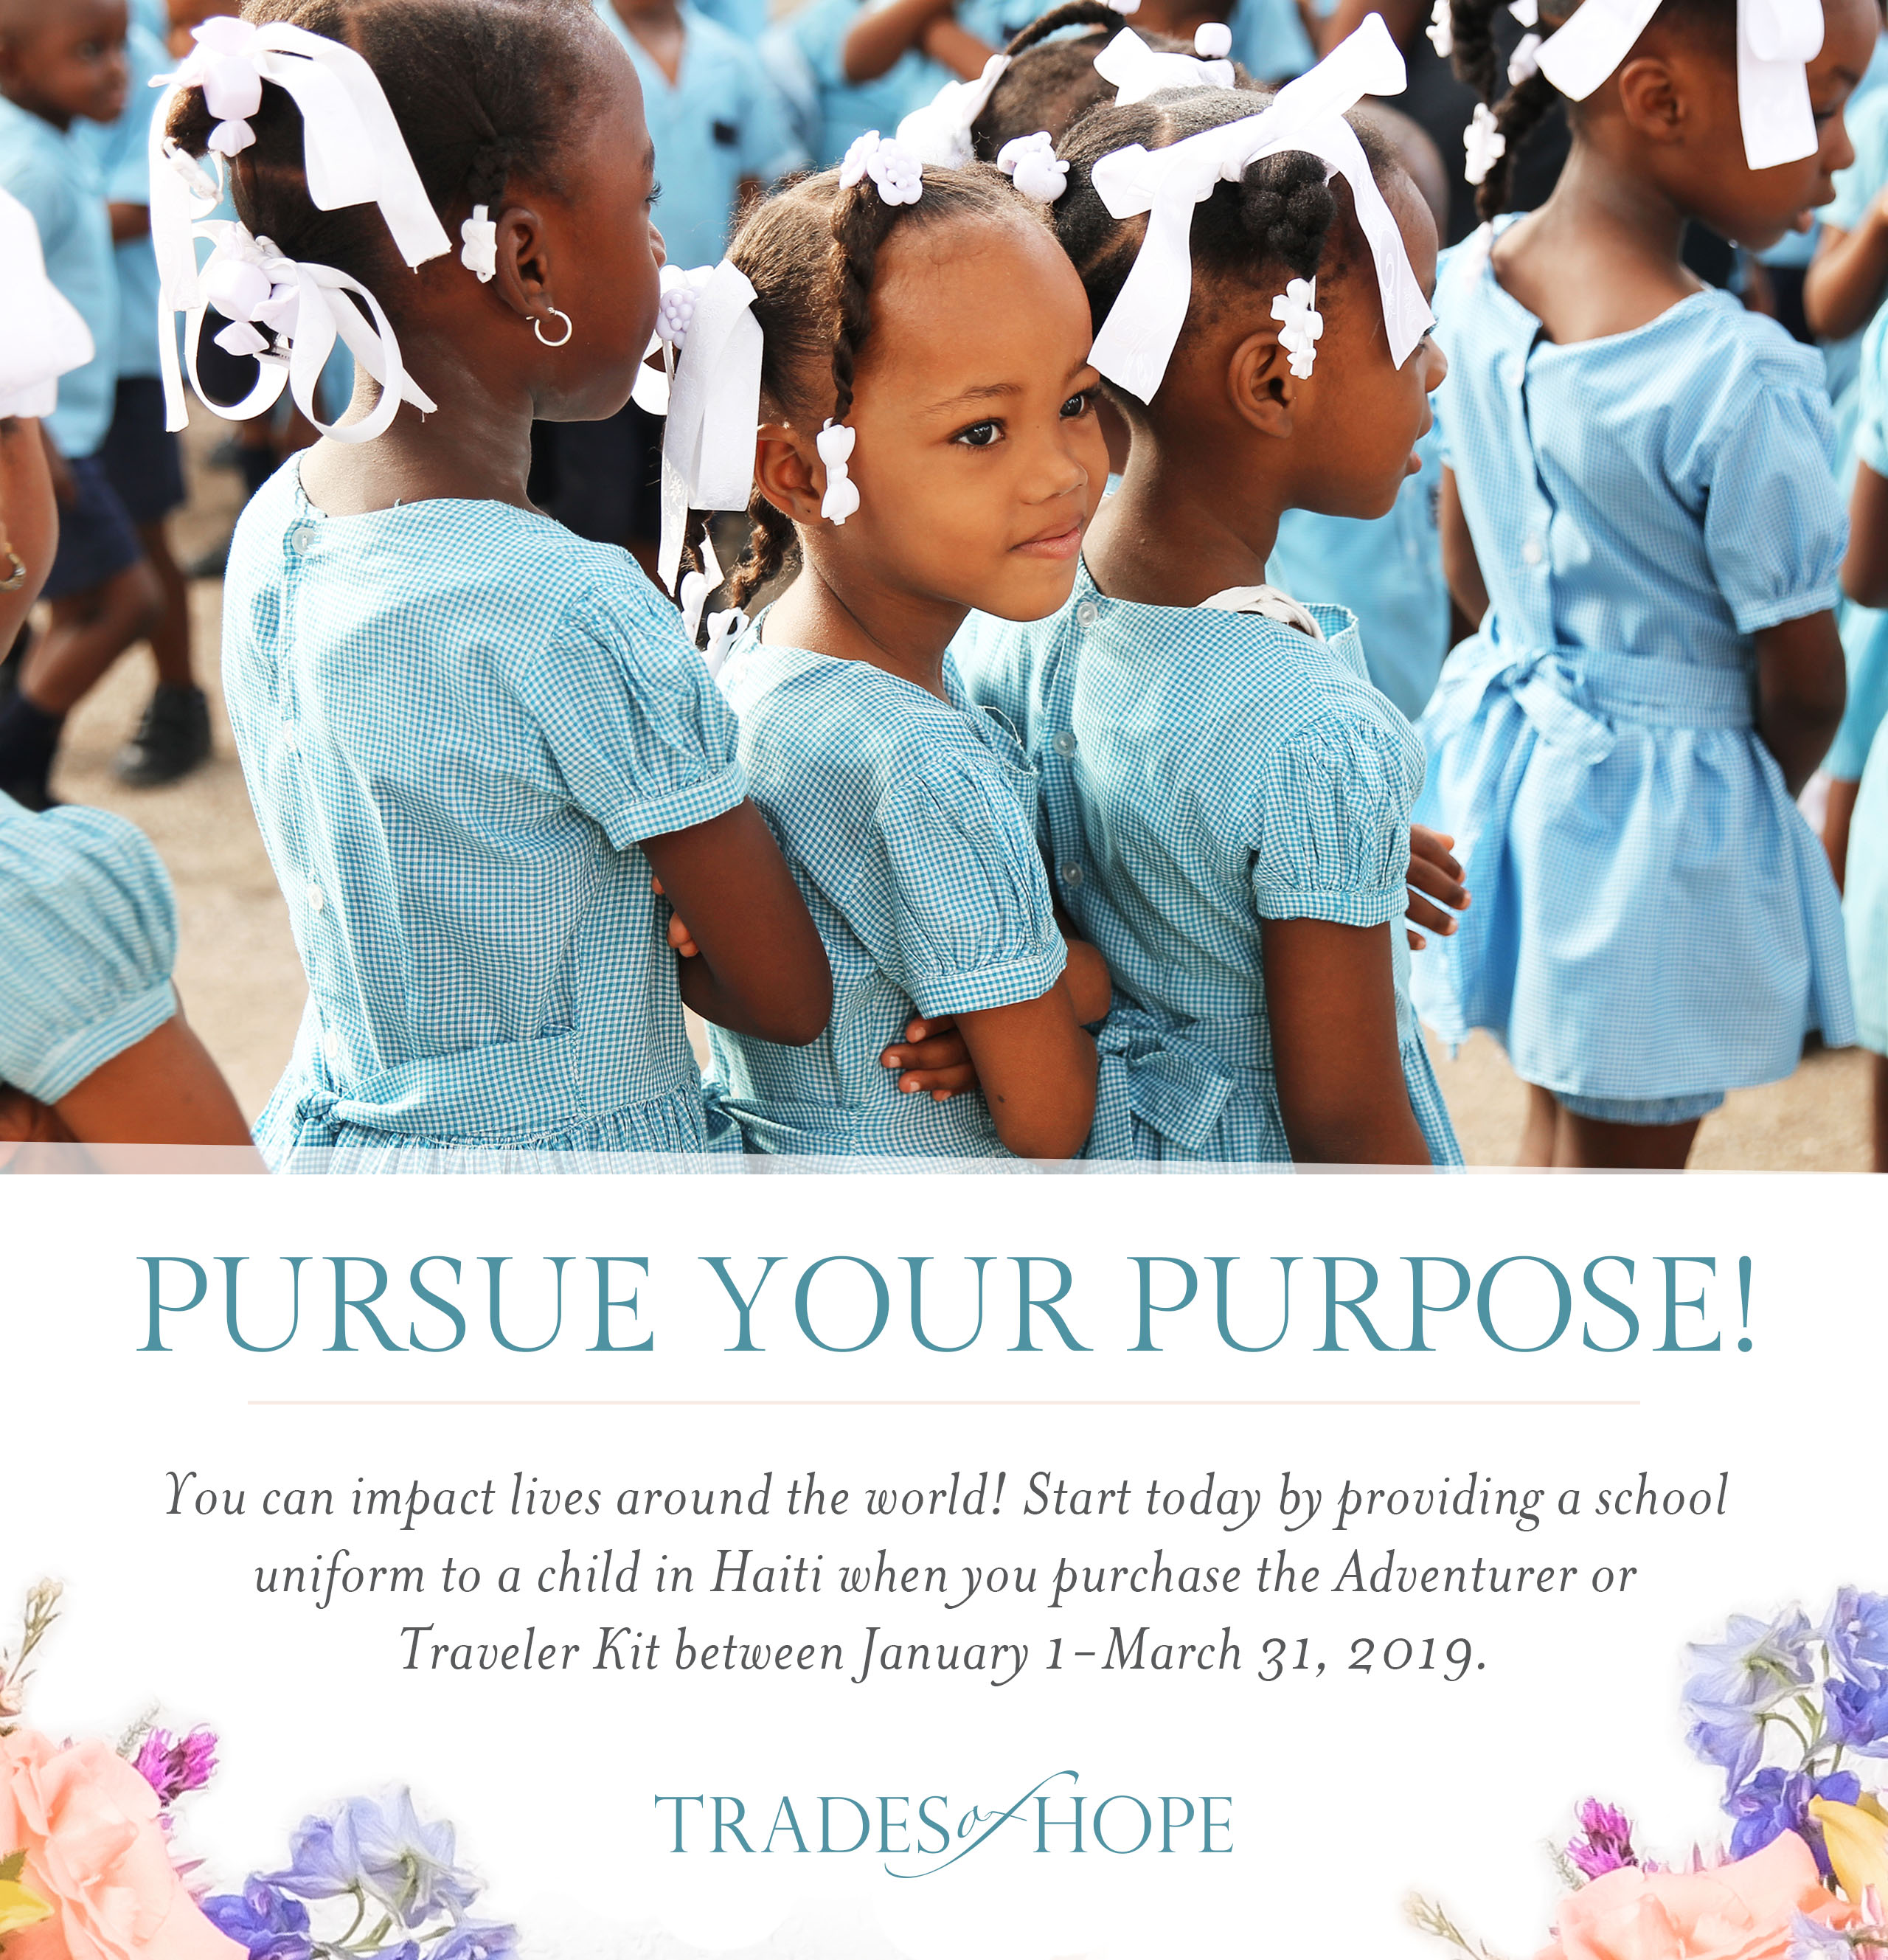 Find out how YOU can provide a school uniform to a child in Haiti with Trades of Hope! Start your business that impacts people all around the globe with Trades of Hope today! Click to read and email tawnyandluke@kindredmovement.com with any questions you may have about this incentive! #tradesofhope #directsales #fairtrade #ethical